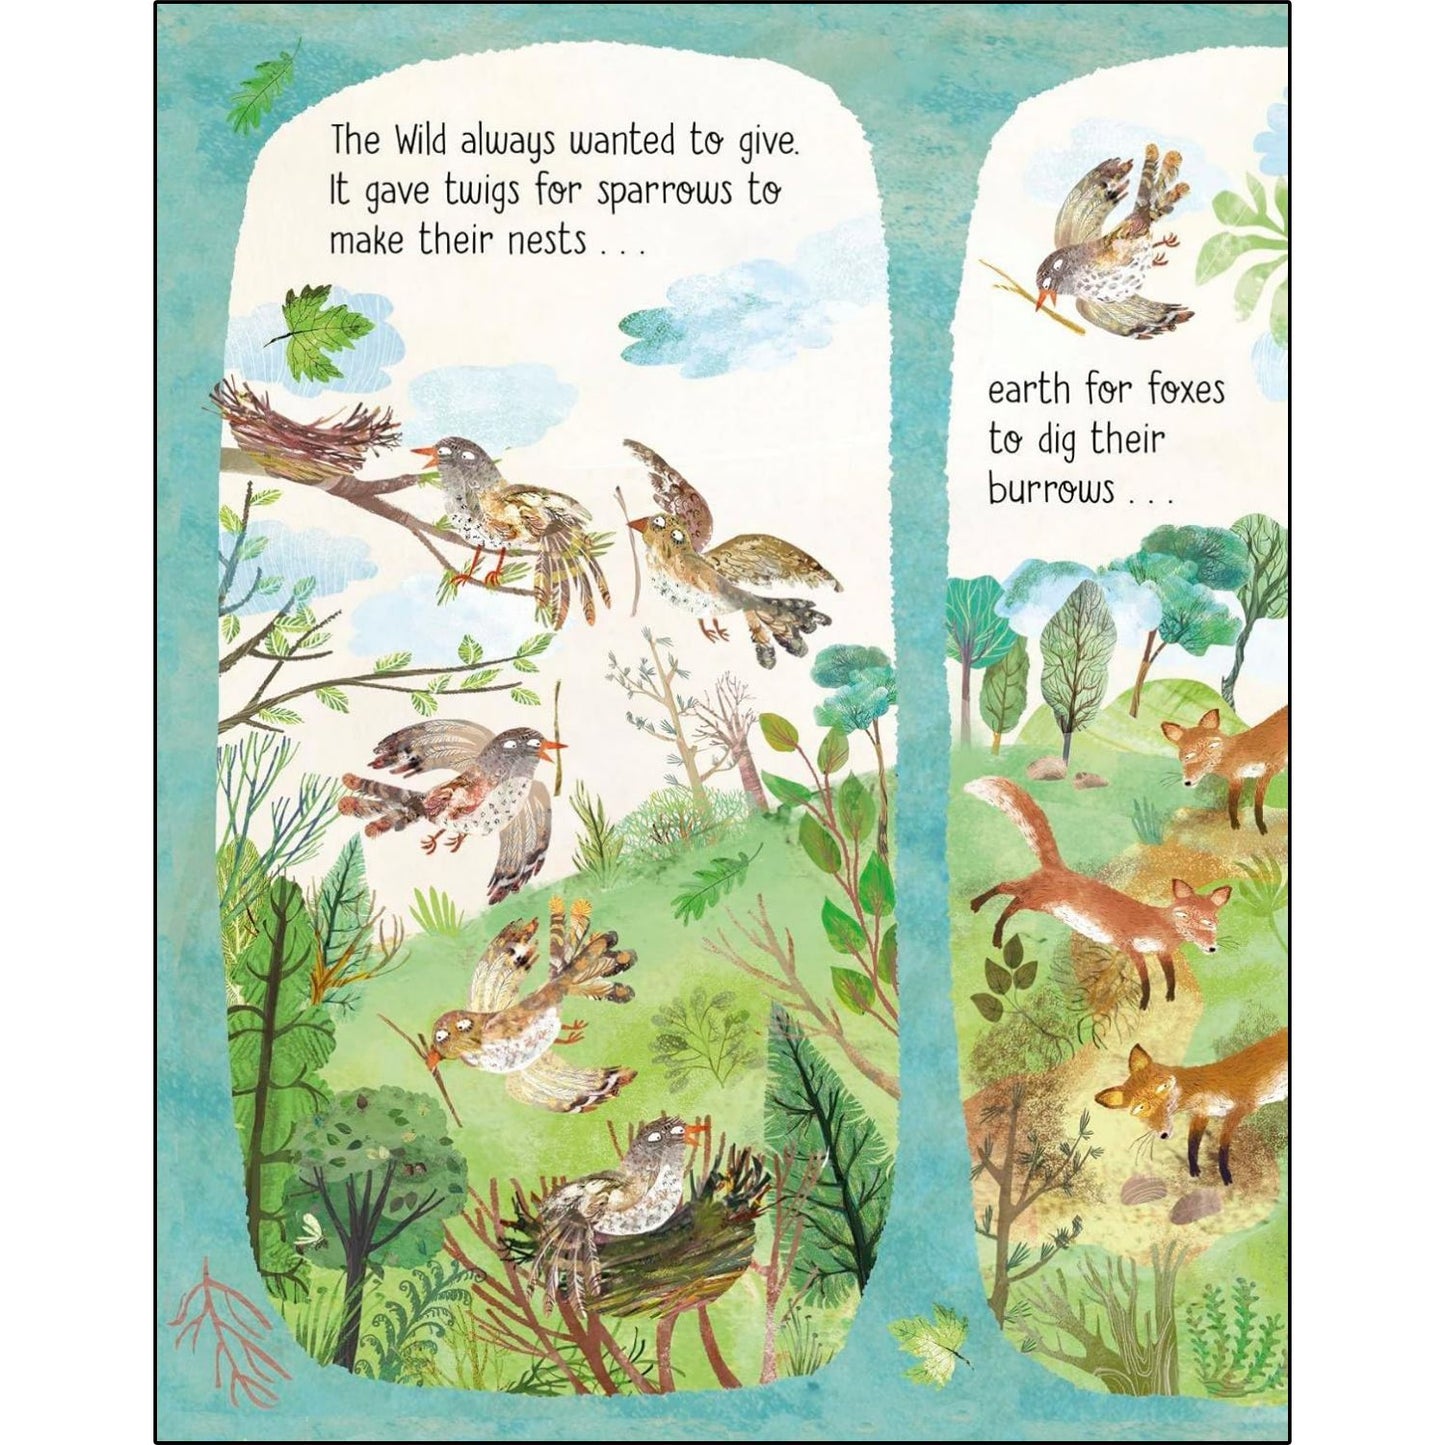 The Wild | Hardcover | Children's Picture Book on Nature